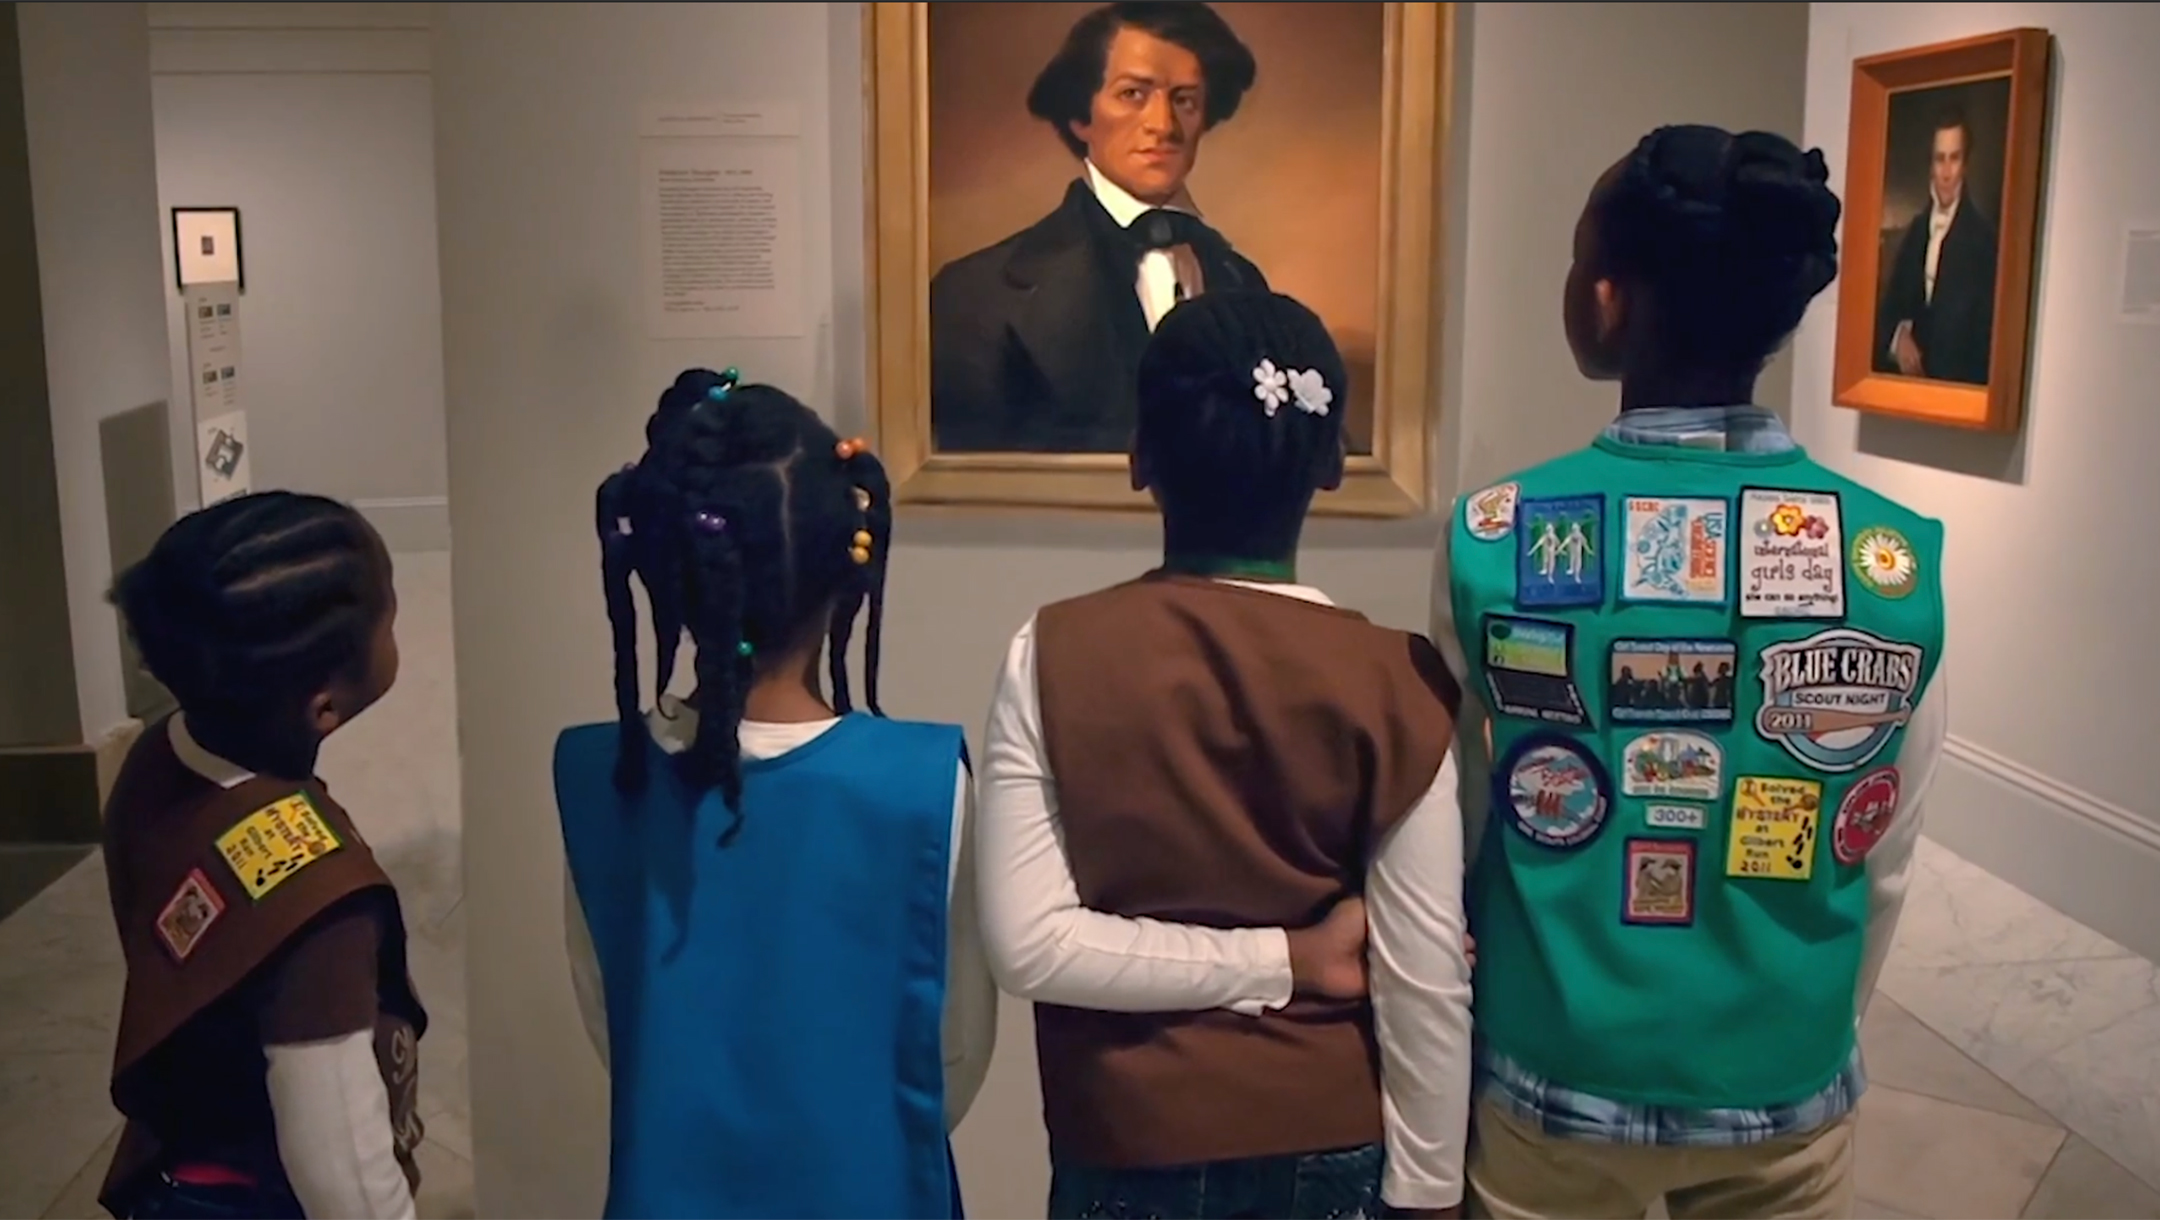 four girl scouts stand in front of a portrait of frederick douglass at the national portrait gallery